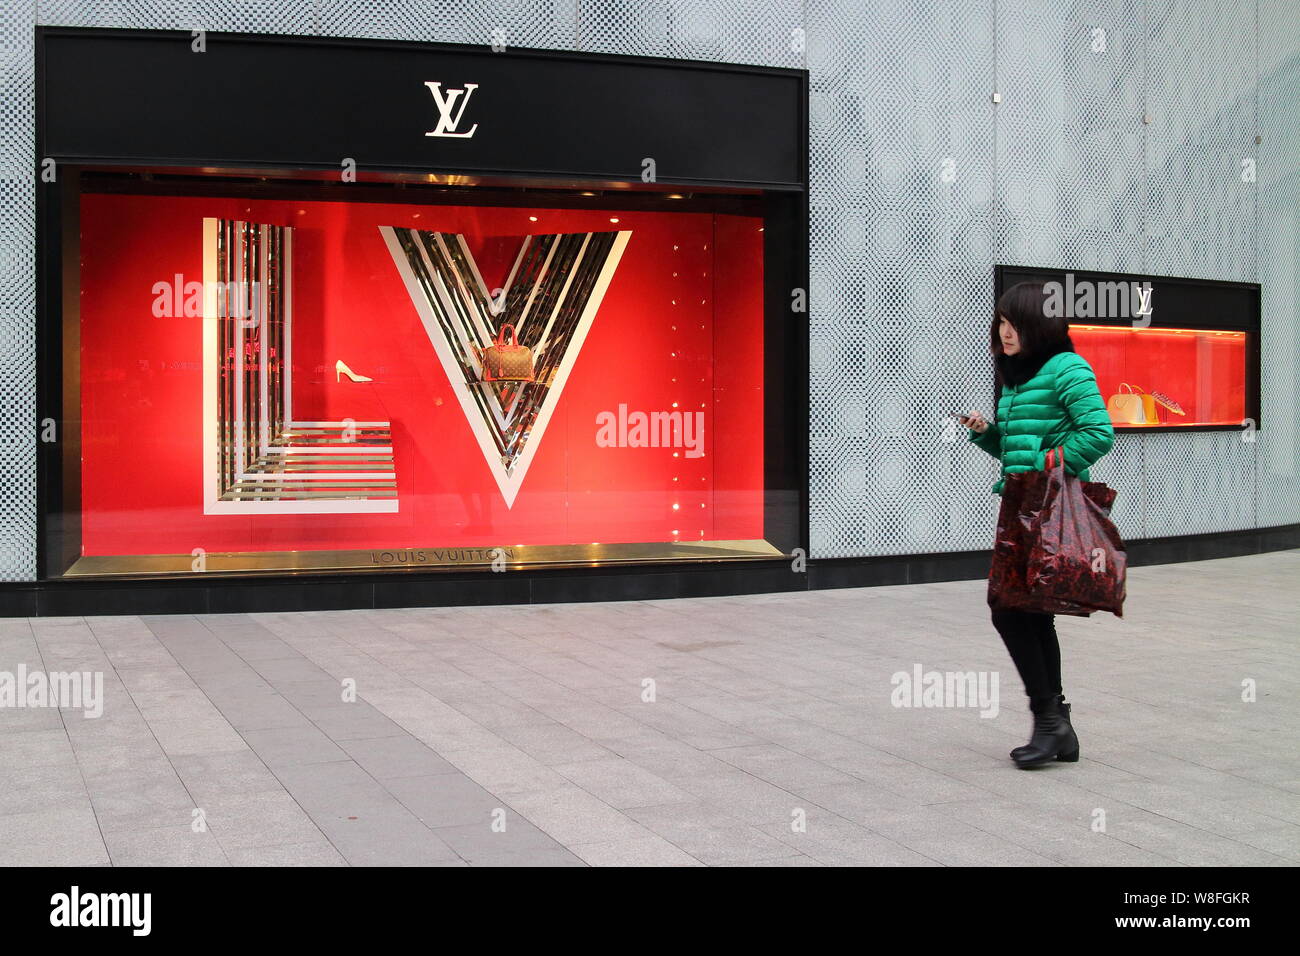 LVMH Moet Hennessey Louis Vuitton Will Not Appeal AMF Ruling Over Hermès  Acquisition - The Fashion Law